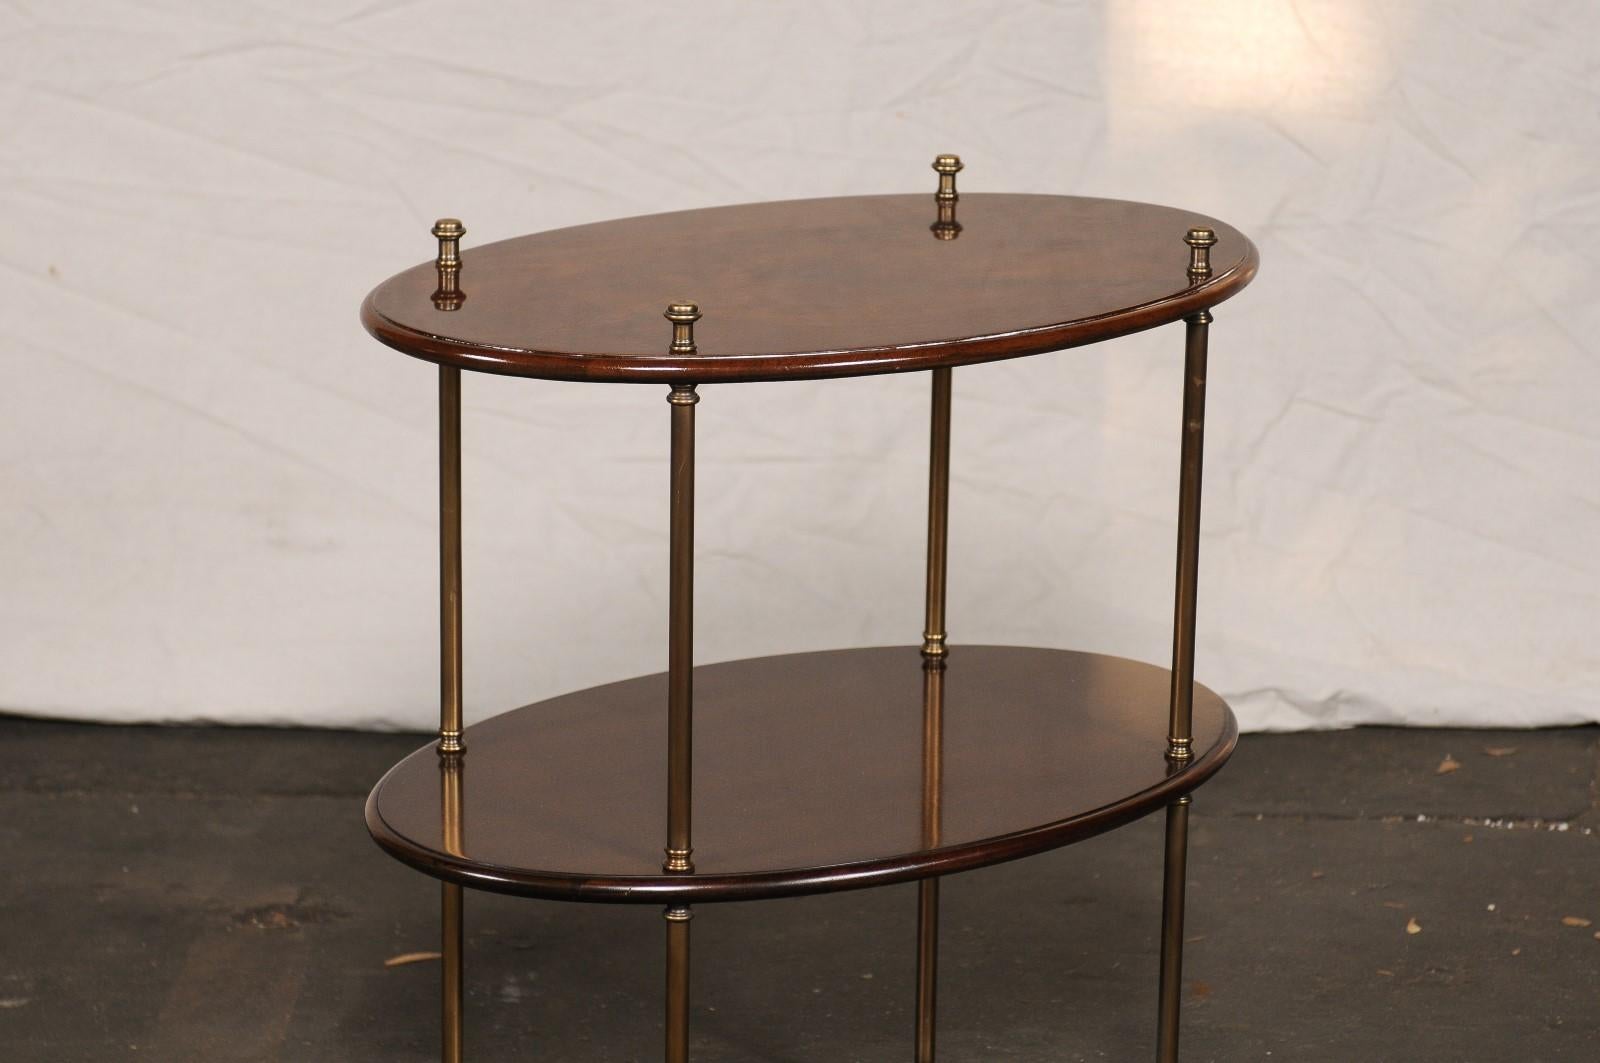 19th-20th Century English Mahogany & Brass Three-Tier Oval Étagère For Sale 3